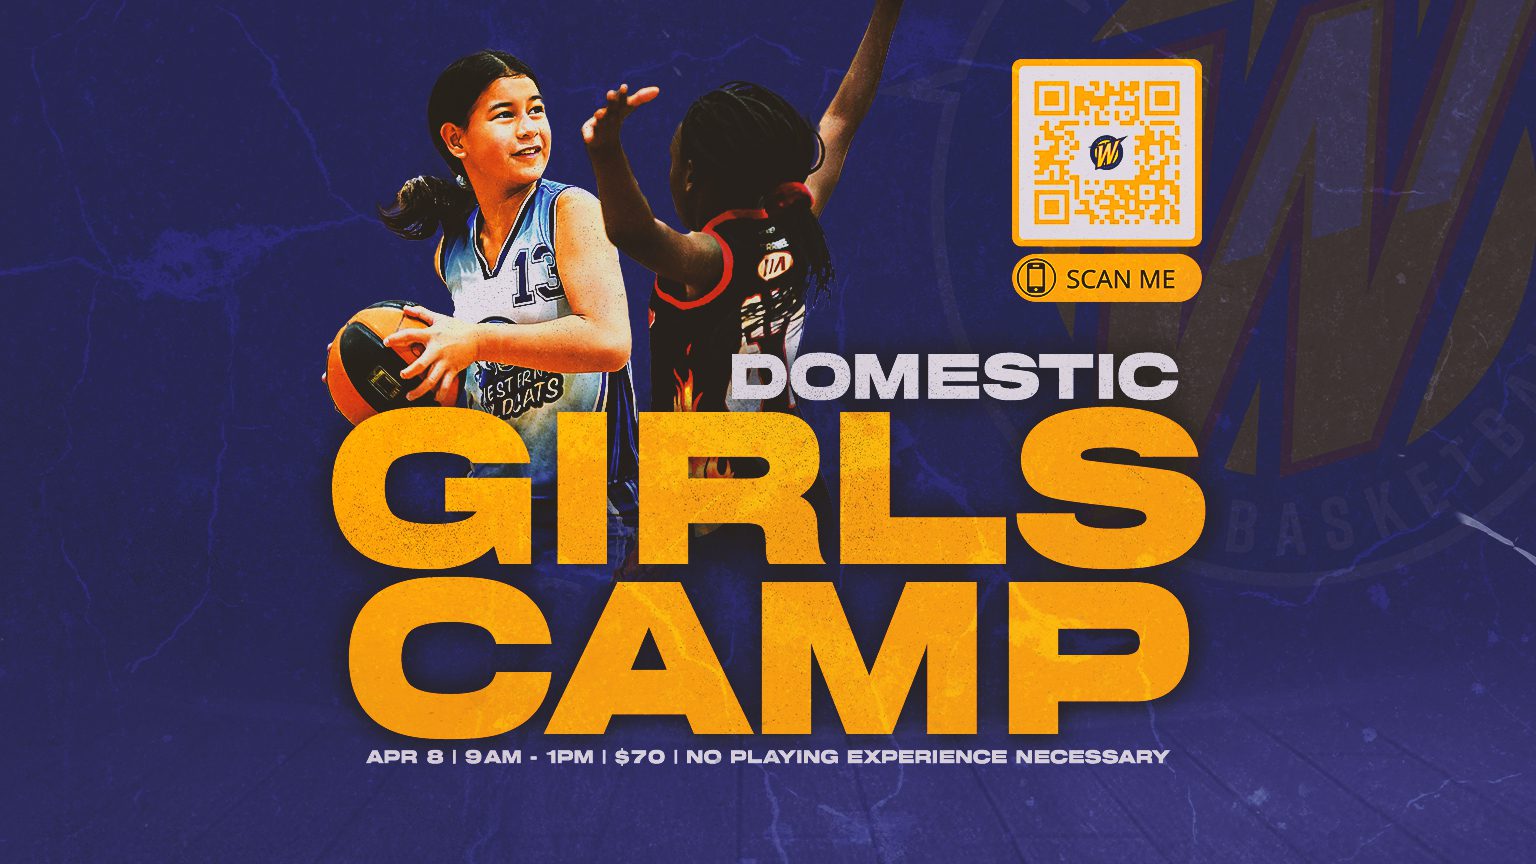 Girls only: Domestic Super Camp